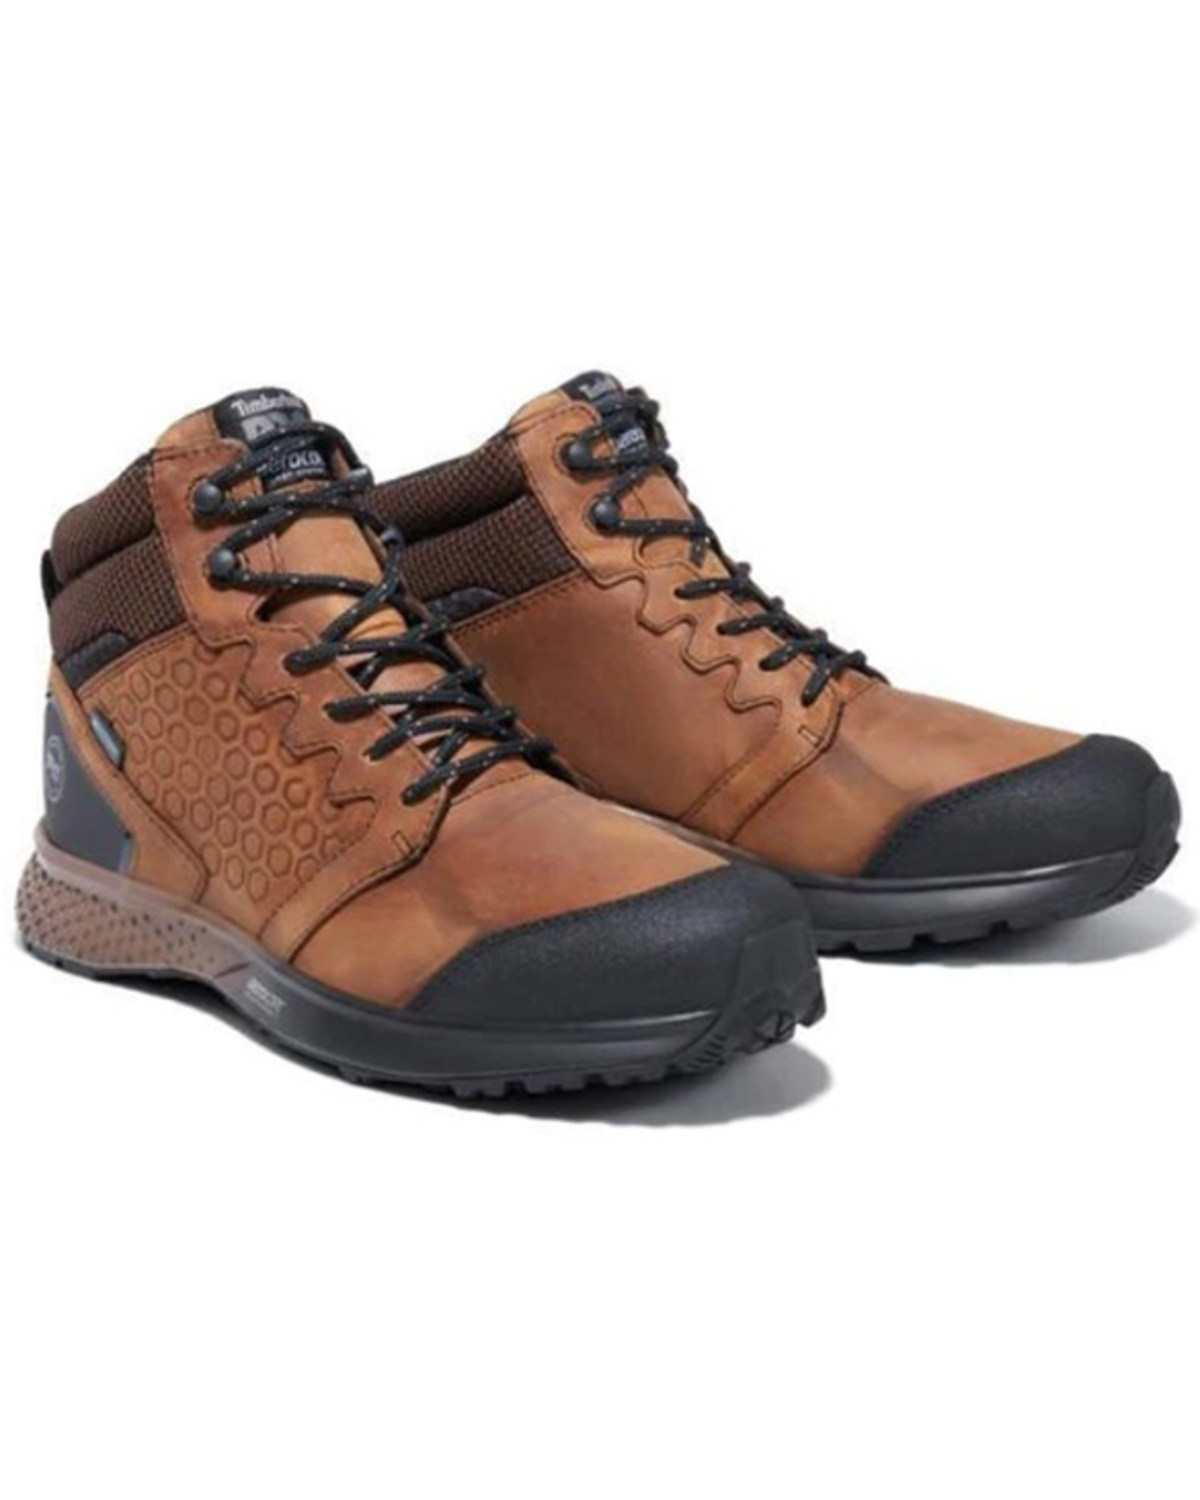 Timberland Pro Men's Reaxion Waterproof Lace-Up Work Shoes - Round Toe